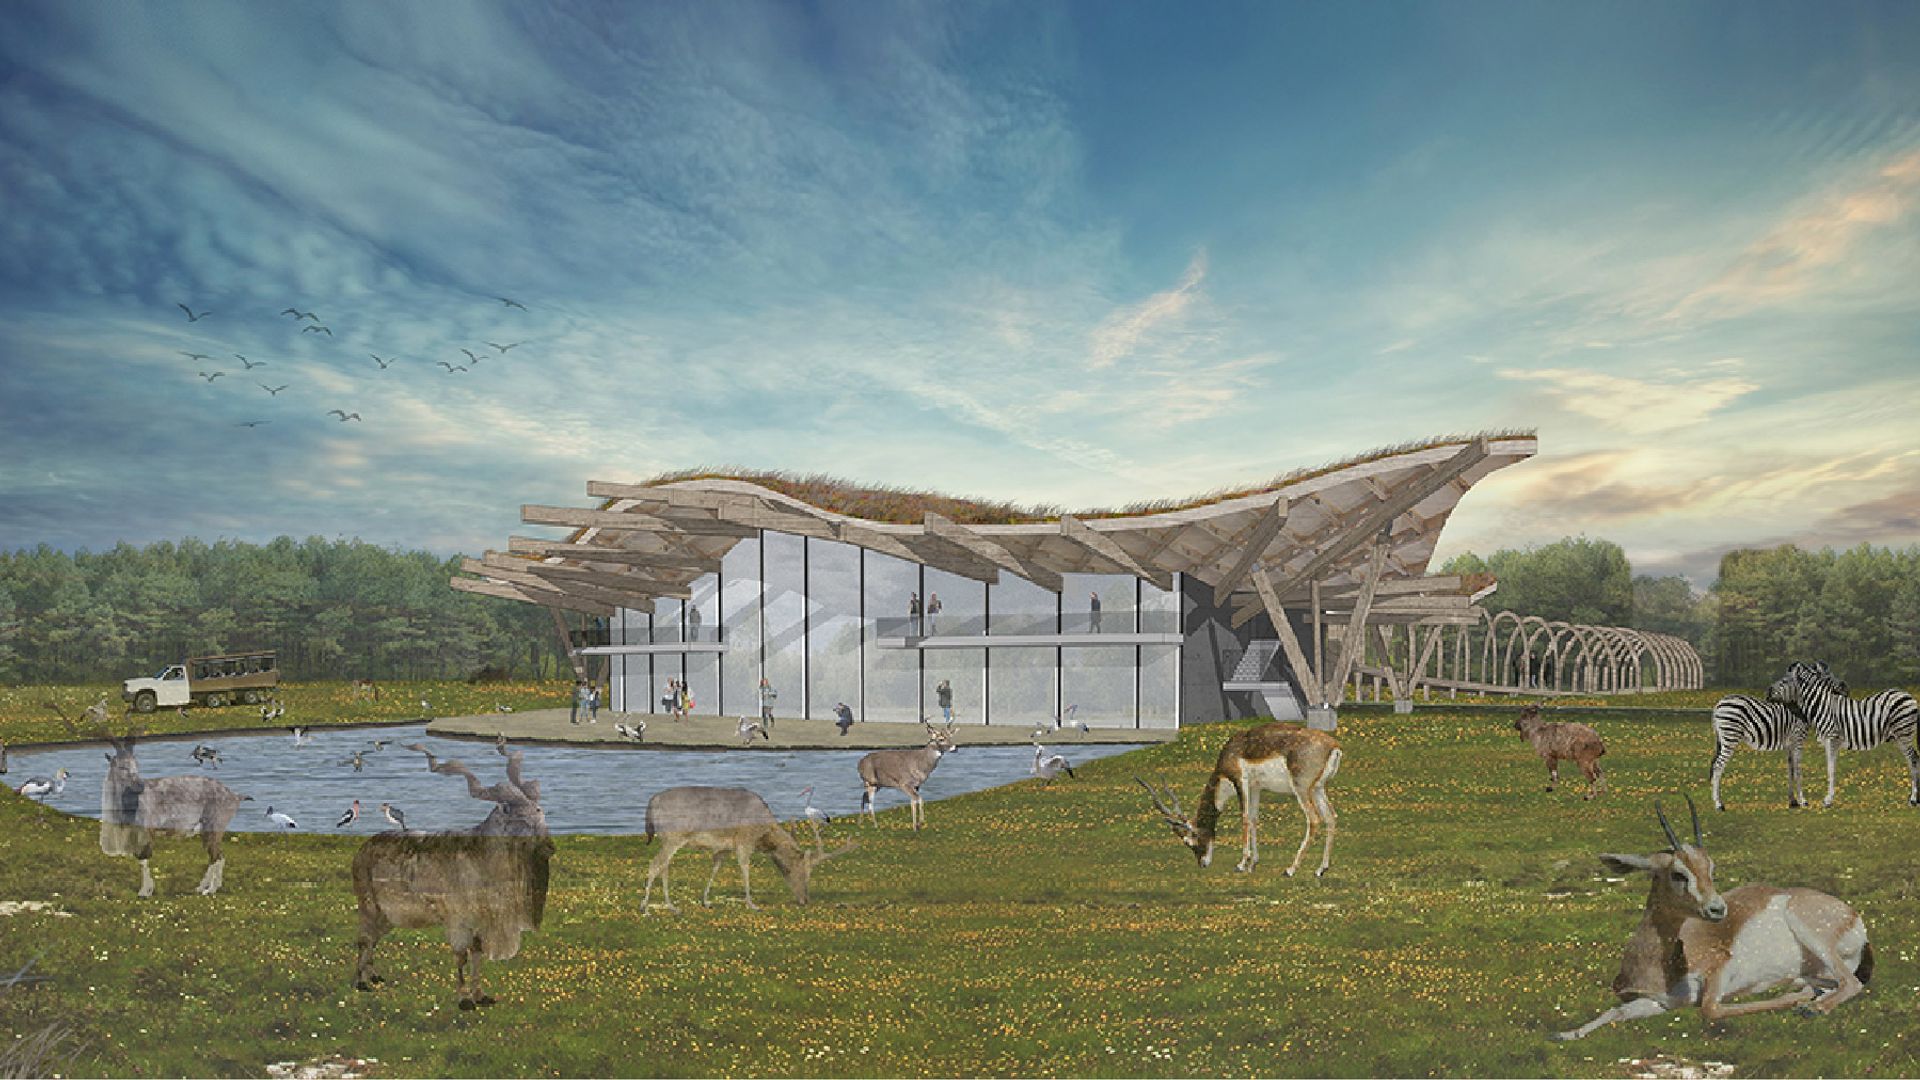 Drawing of unusual visitor lodge in safari park with curved roof